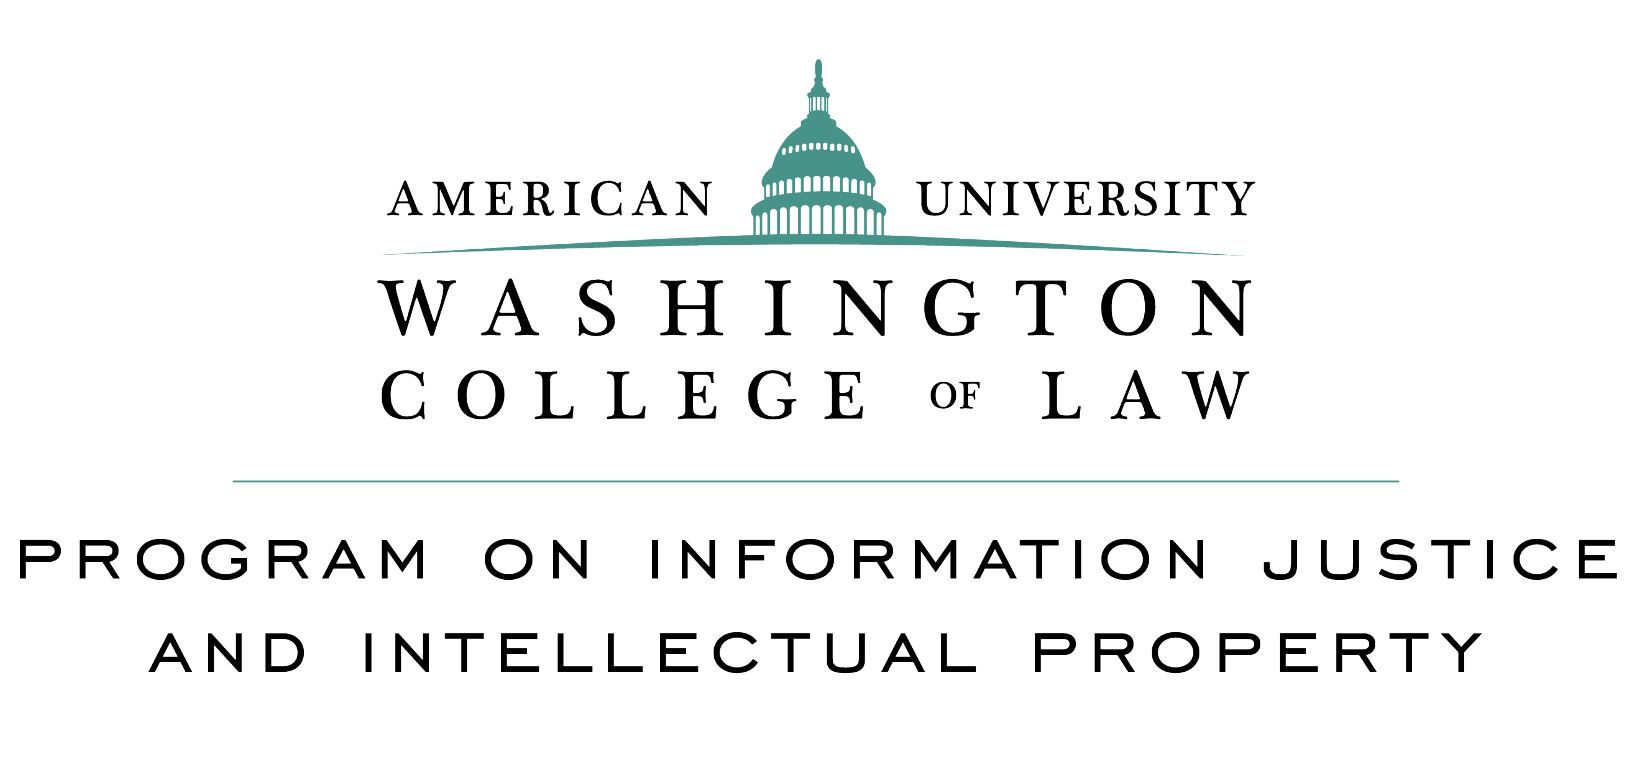 American University Washington College of Law Program on Information Justice and Intellectual Property logo